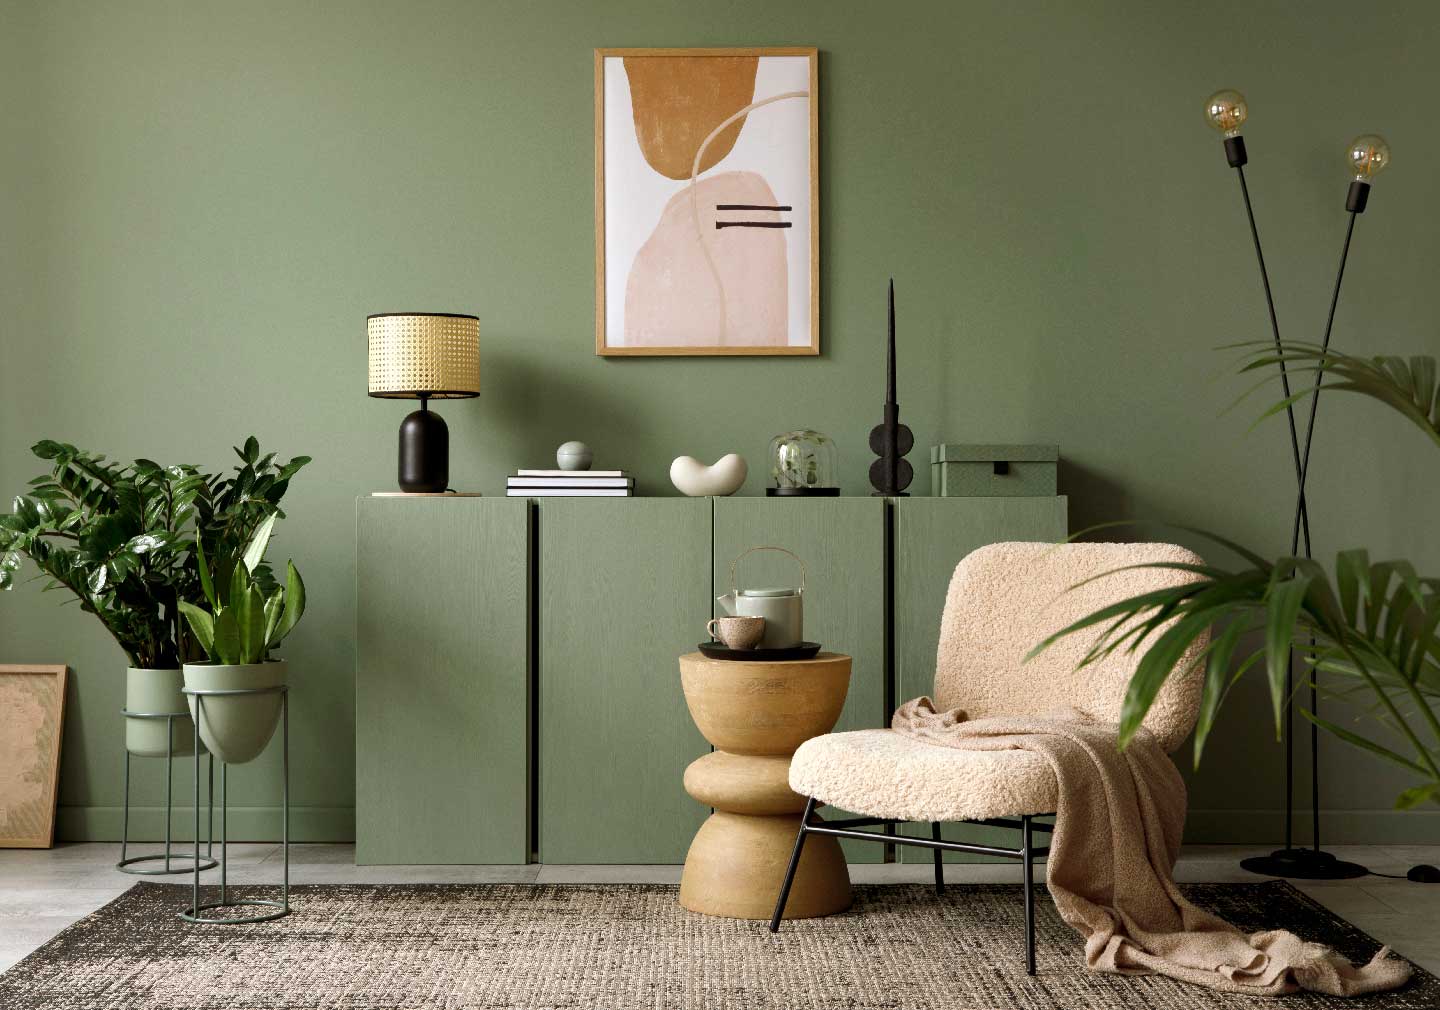 Wall color trends for 2023 - green shade for walls